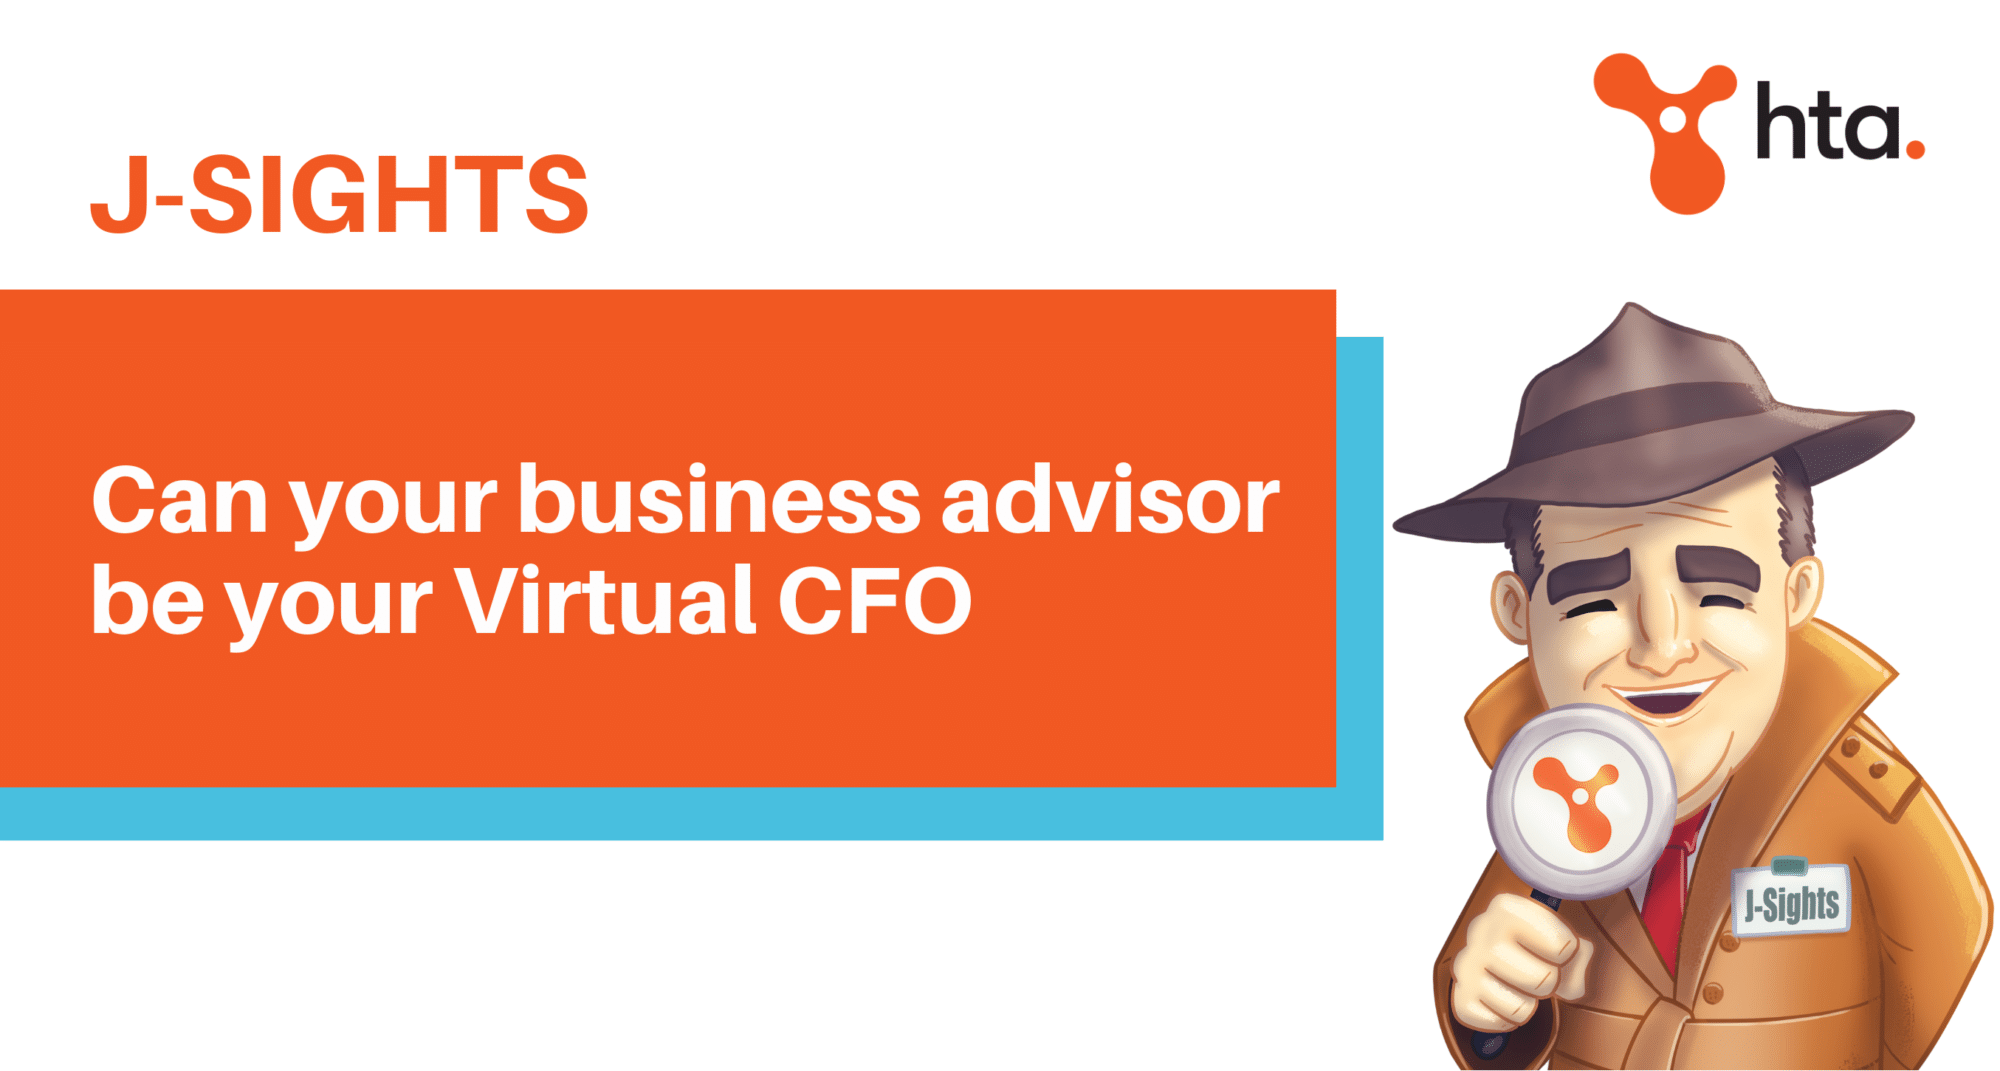 Can your business advisor be your Virtual CFO?